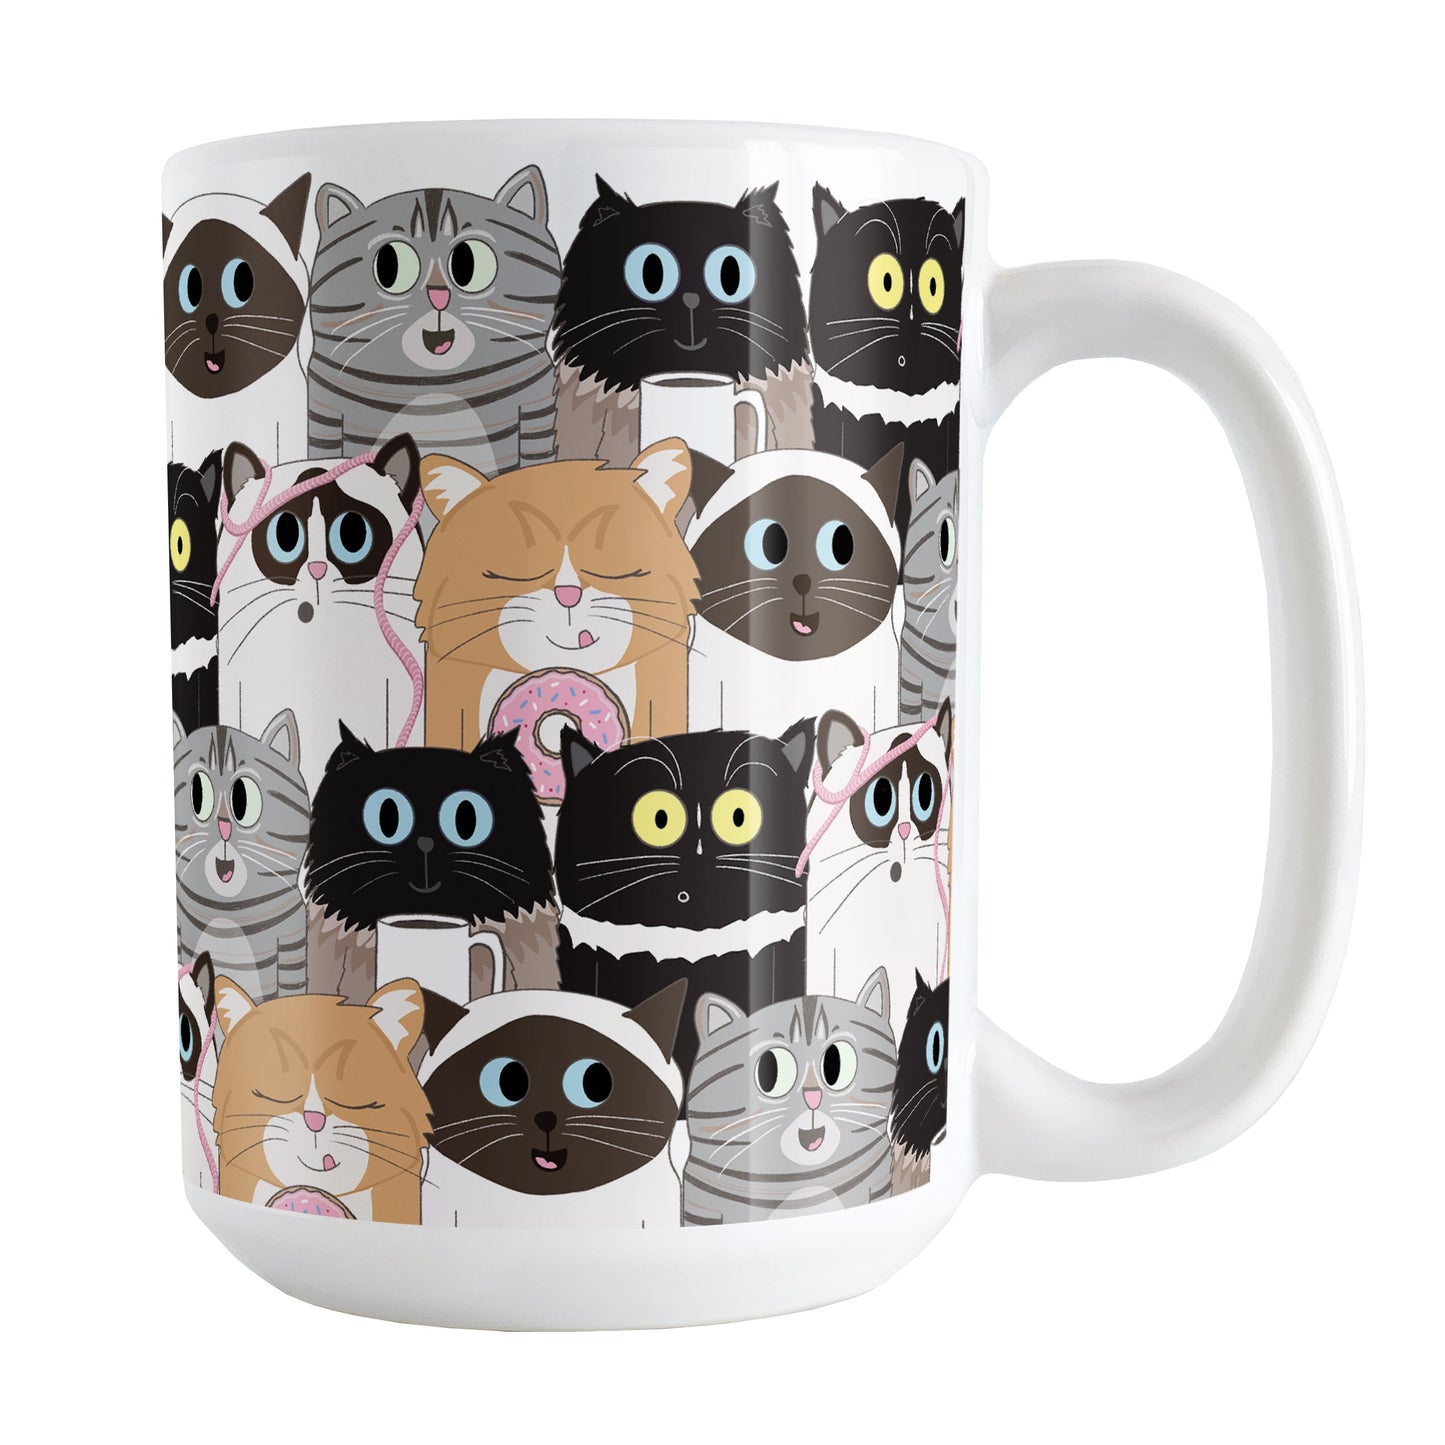 Cute Cat Stack Pattern Mug (15oz) at Amy's Coffee Mugs. Cute cats mug with an illustrated pattern of different breeds of cats with different fun expressions, with yarn, coffee, and donuts. This stacked pattern of cats wraps around the ceramic mug to the handle.